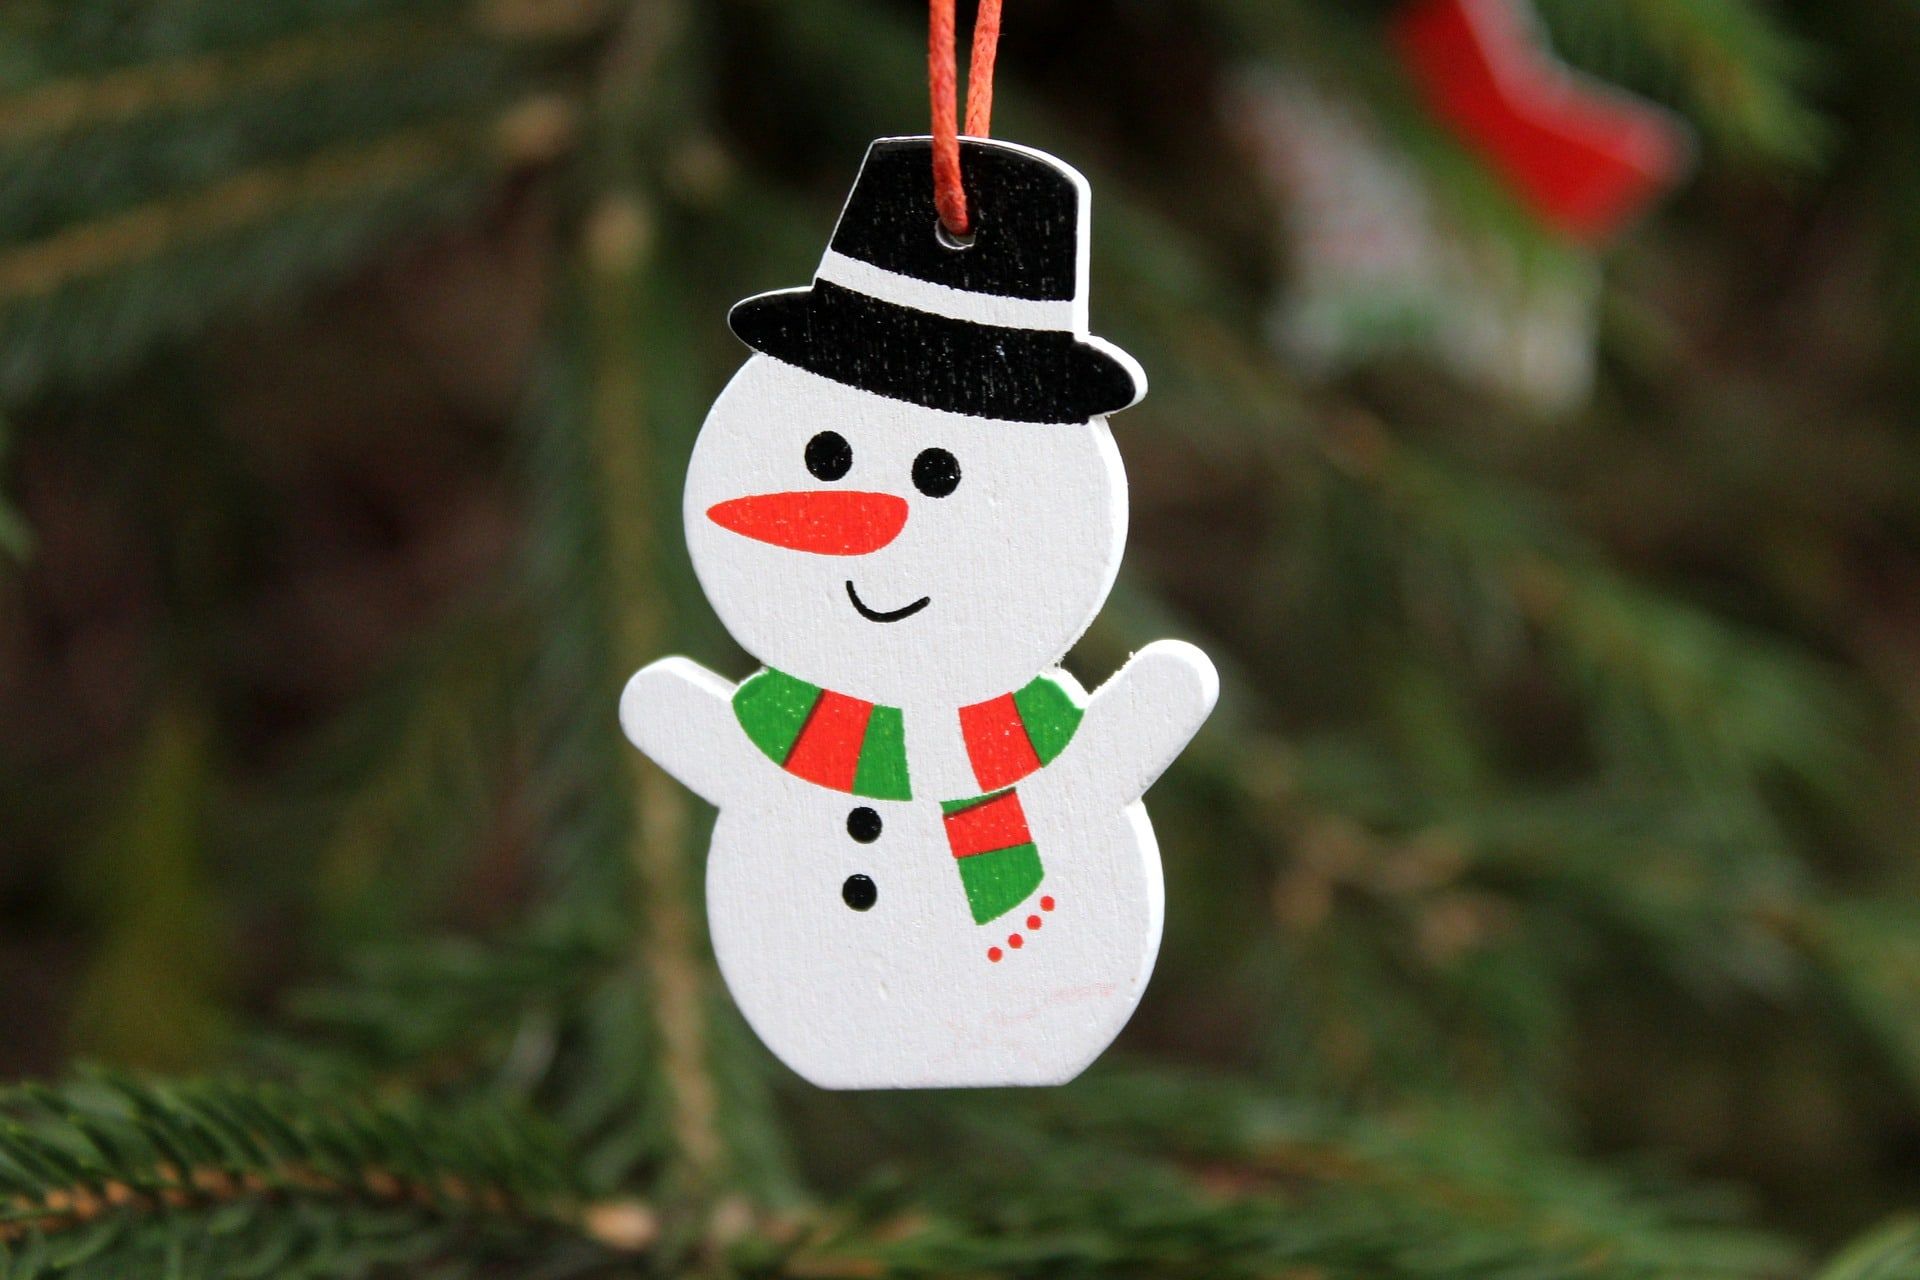 Hanging Snowman made of styrofoam and painted with hat, scarf and eyes and smile